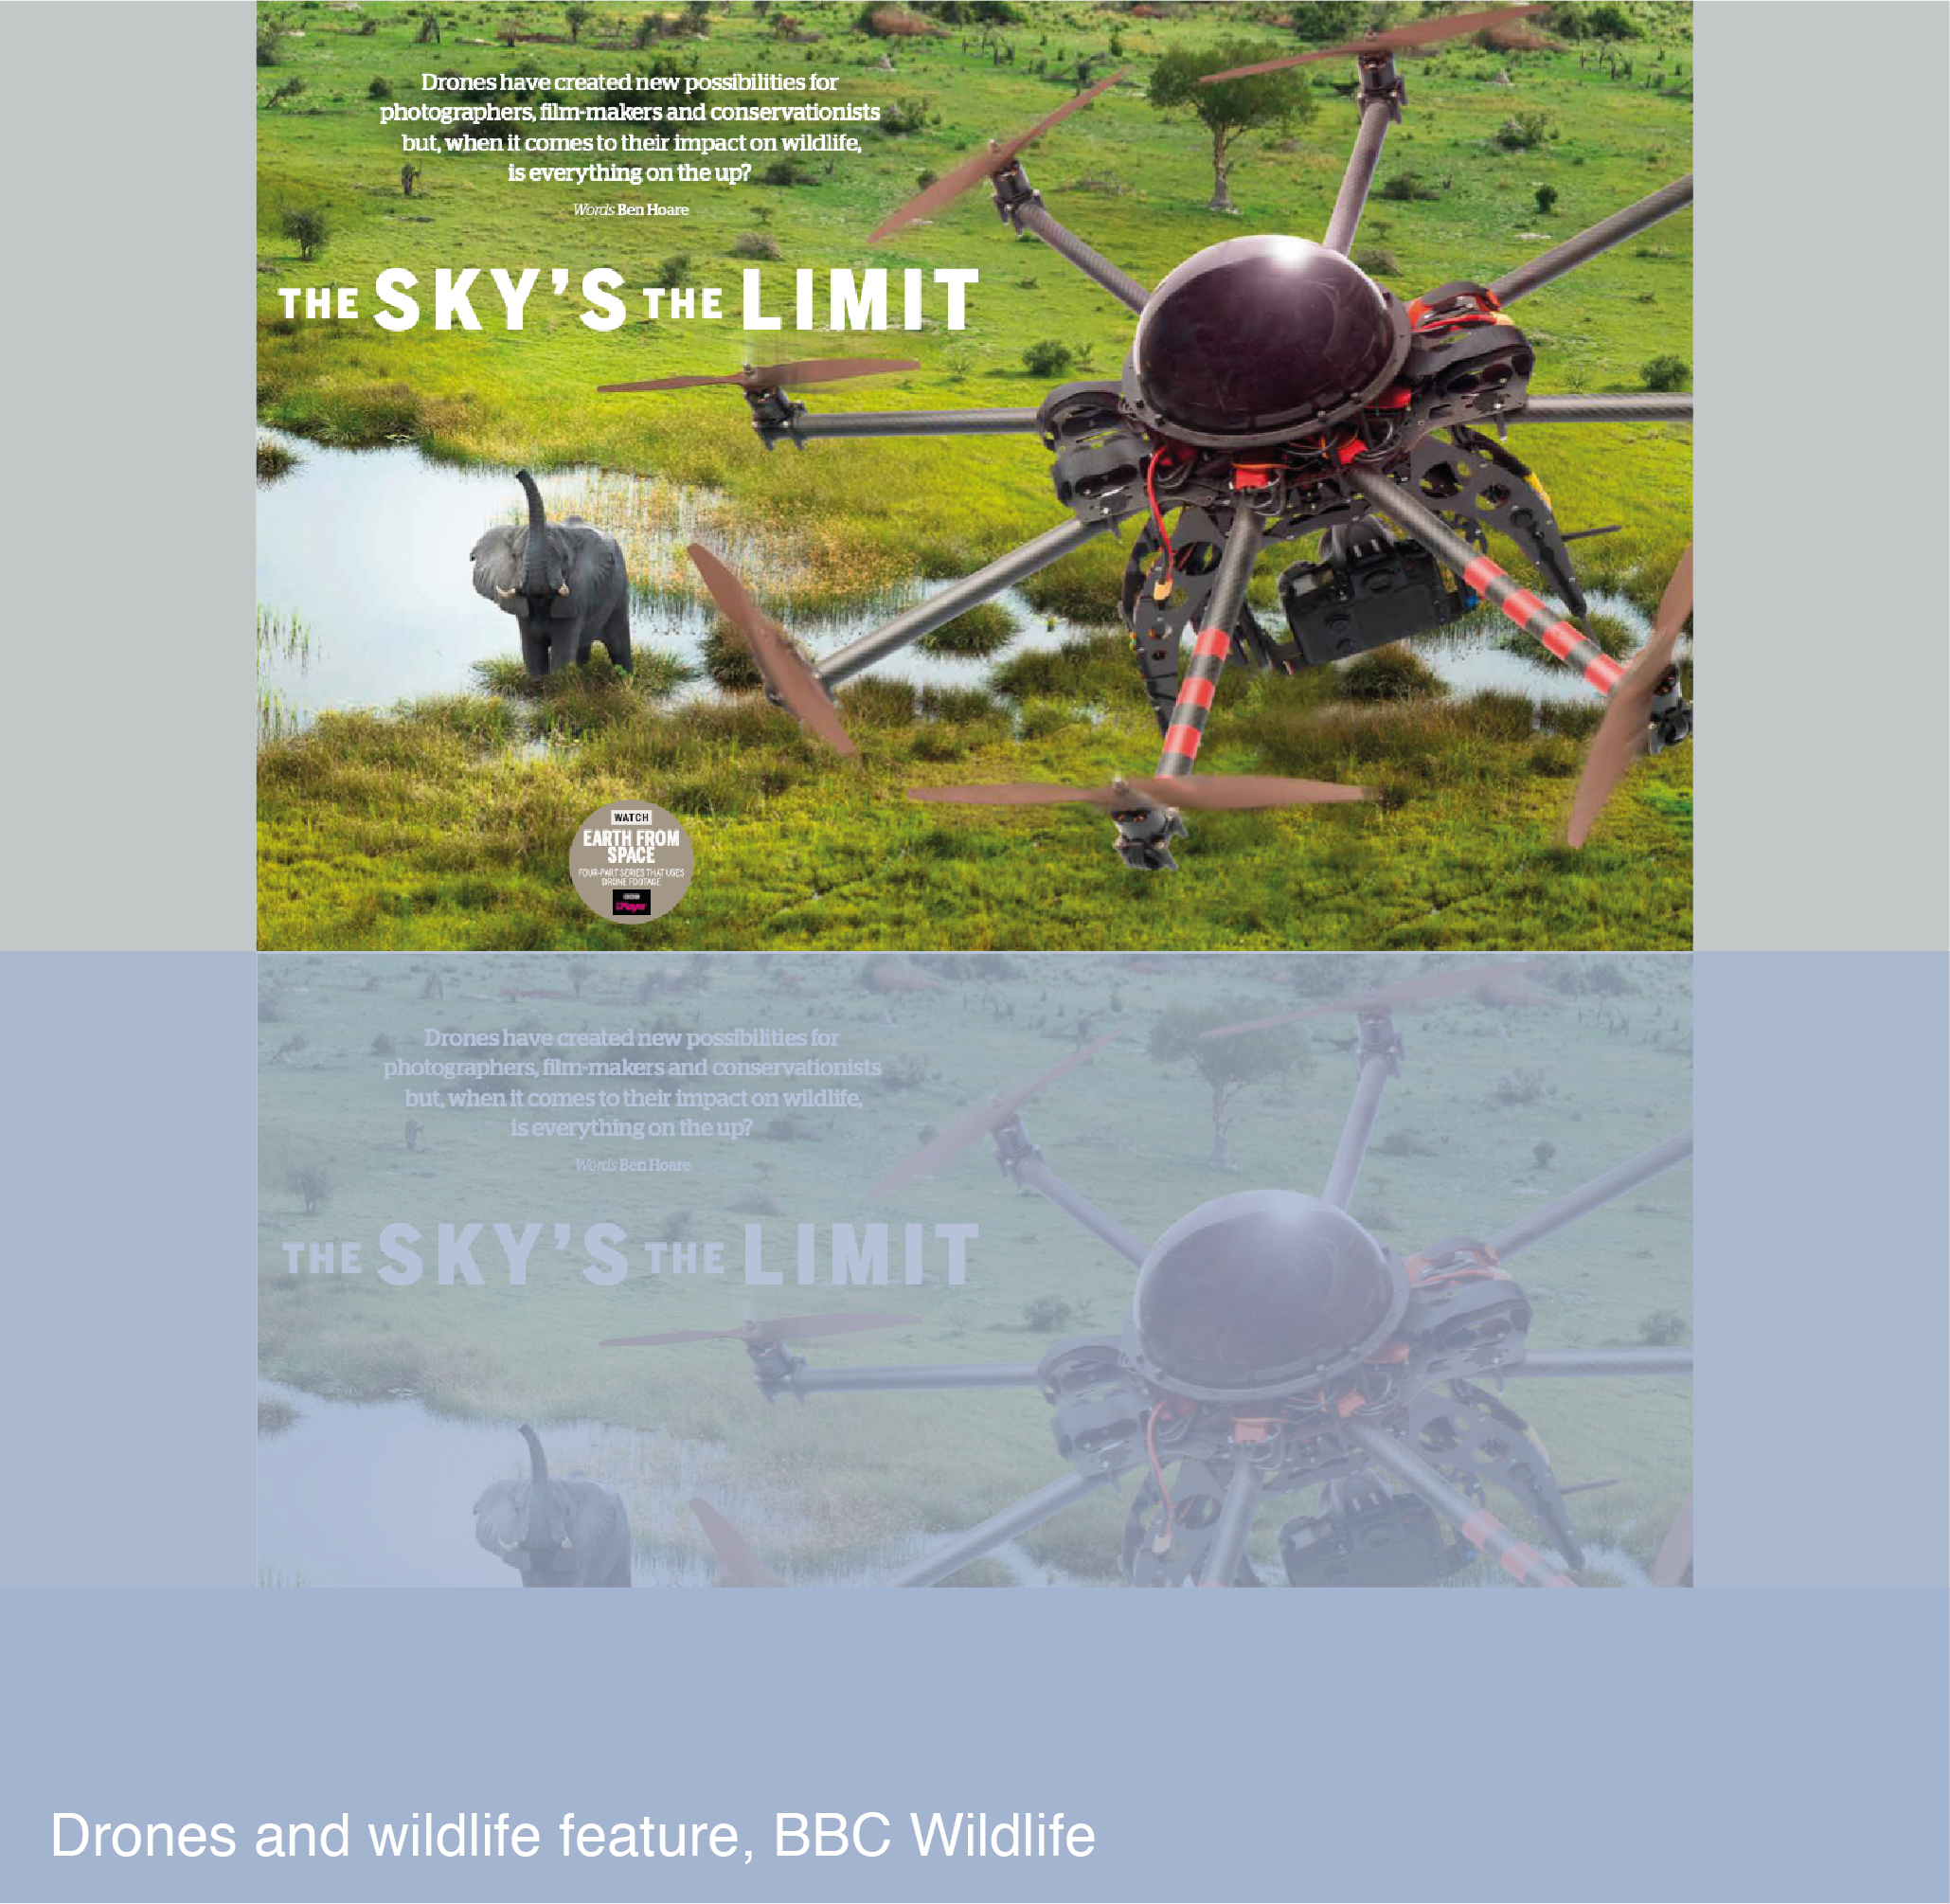 Drones and wildlife feature for BBC Wildlife